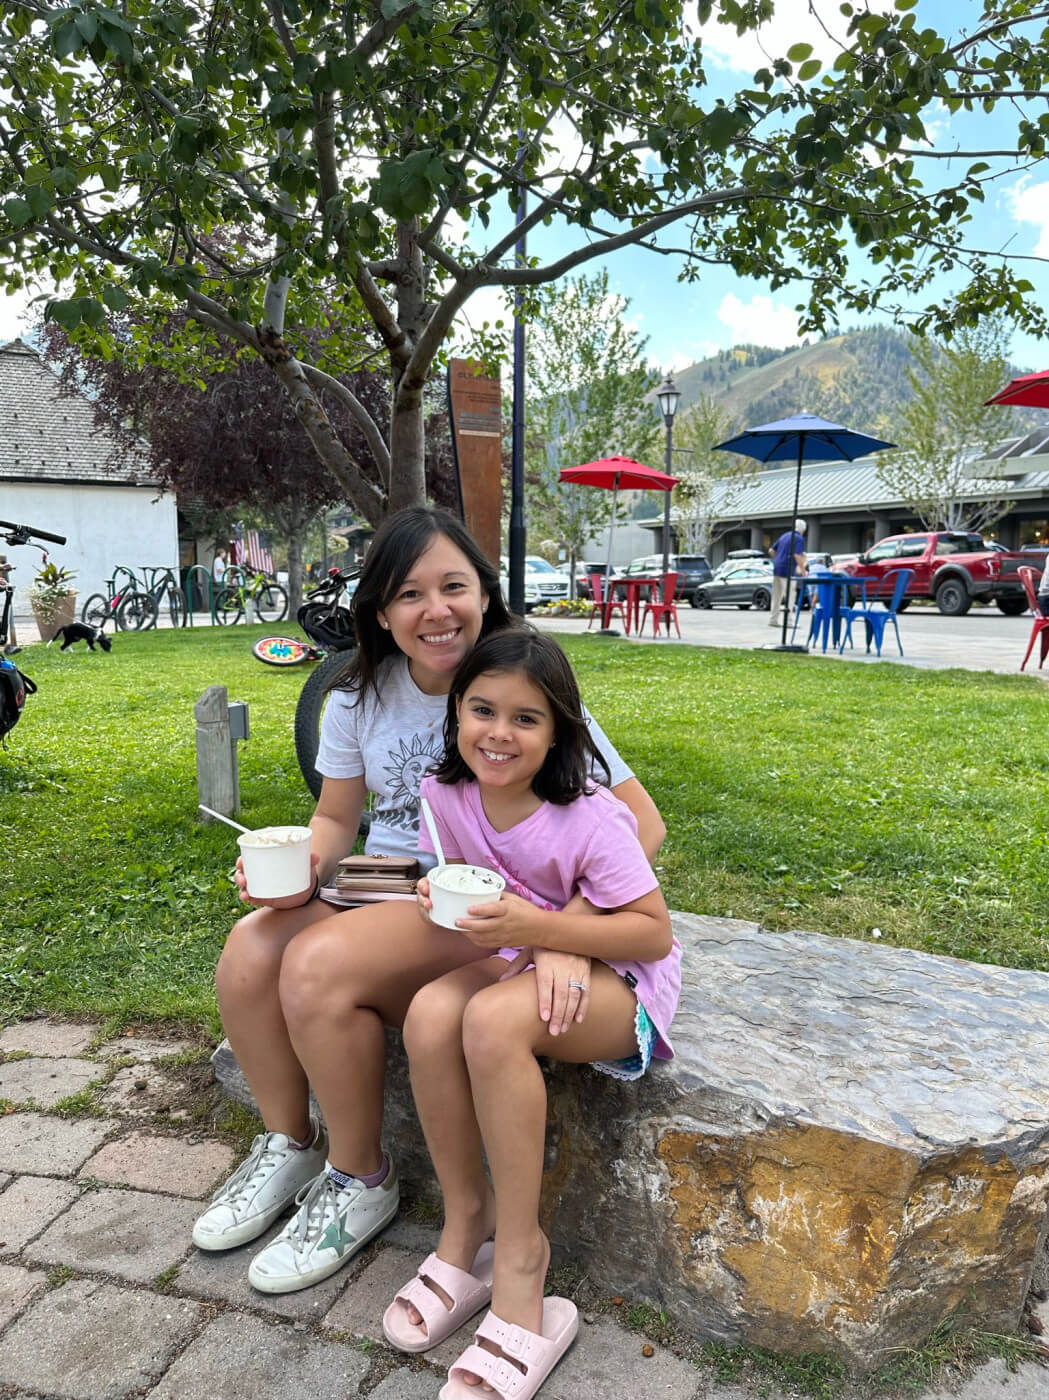 Leroy's Ice Cream in Ketchum - The Best of Sun Valley, Idaho with Kids